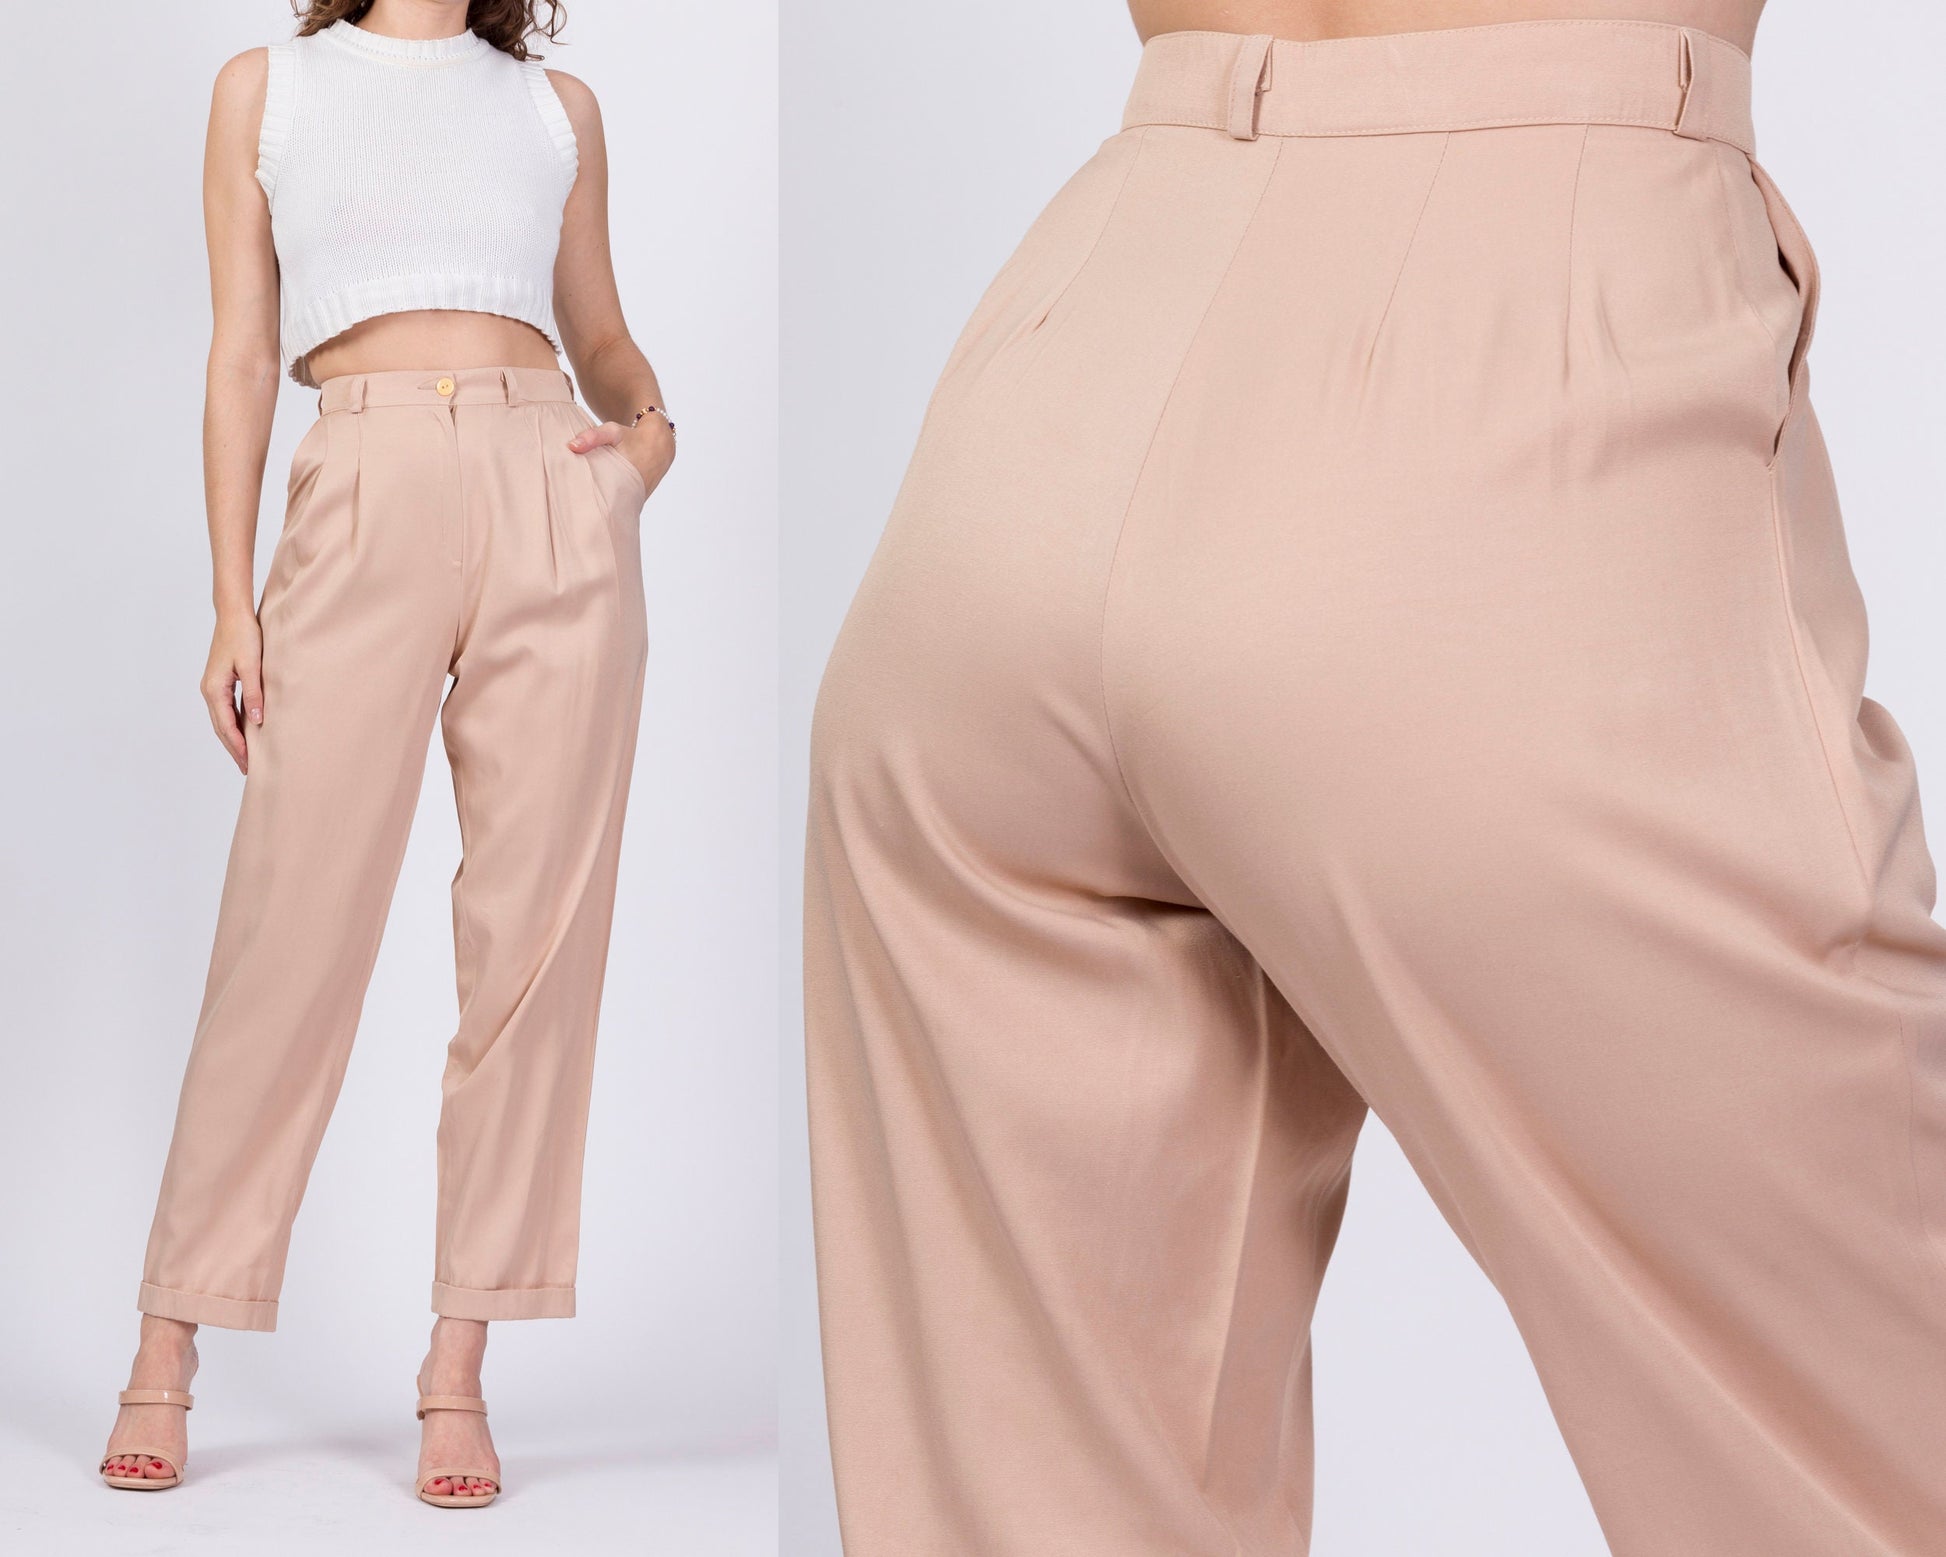 80s Tan High Waist Trousers - Small, 25.75 – Flying Apple Vintage